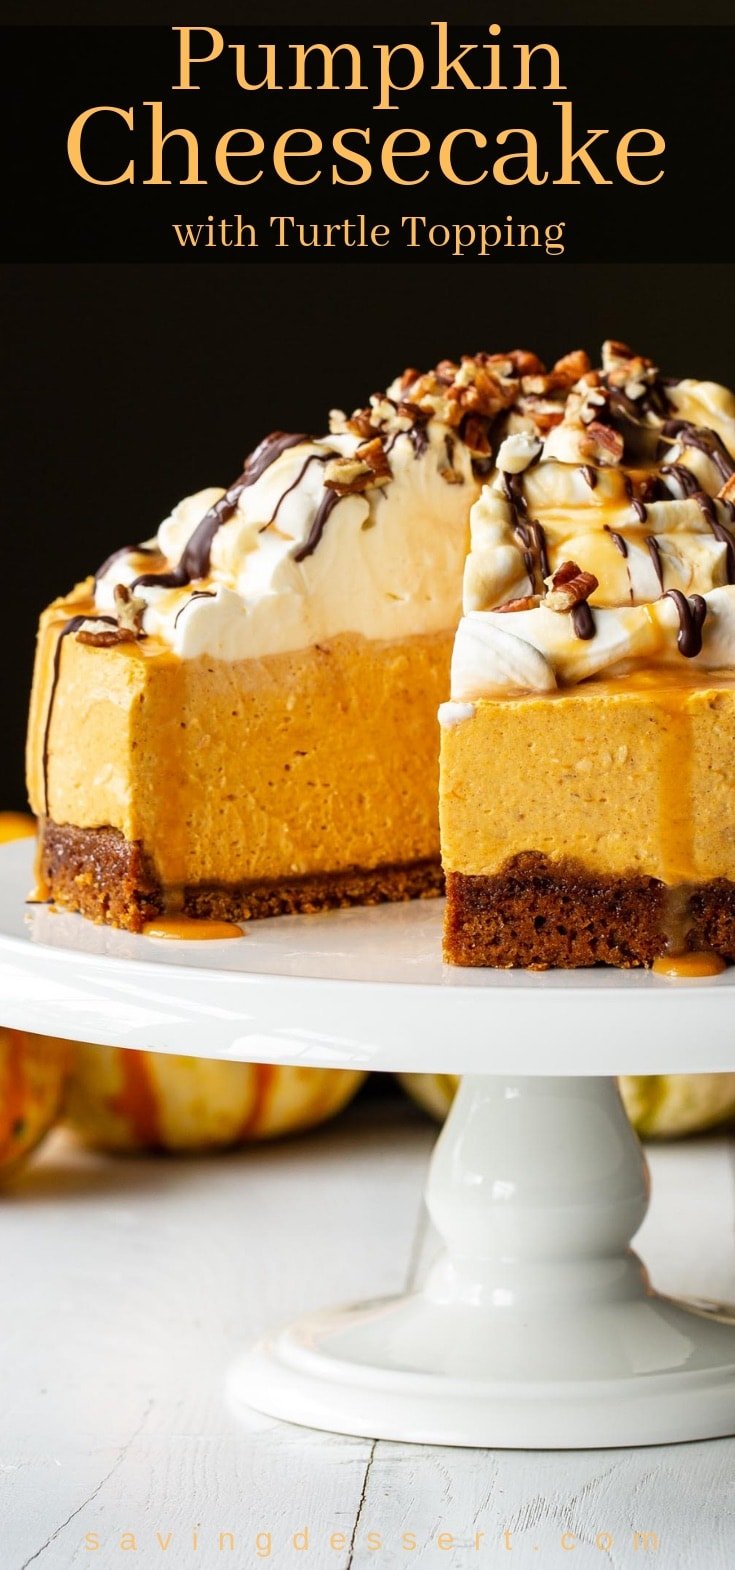 A sliced pumpkin cheesecake with whipped cream and a turtle candied topping